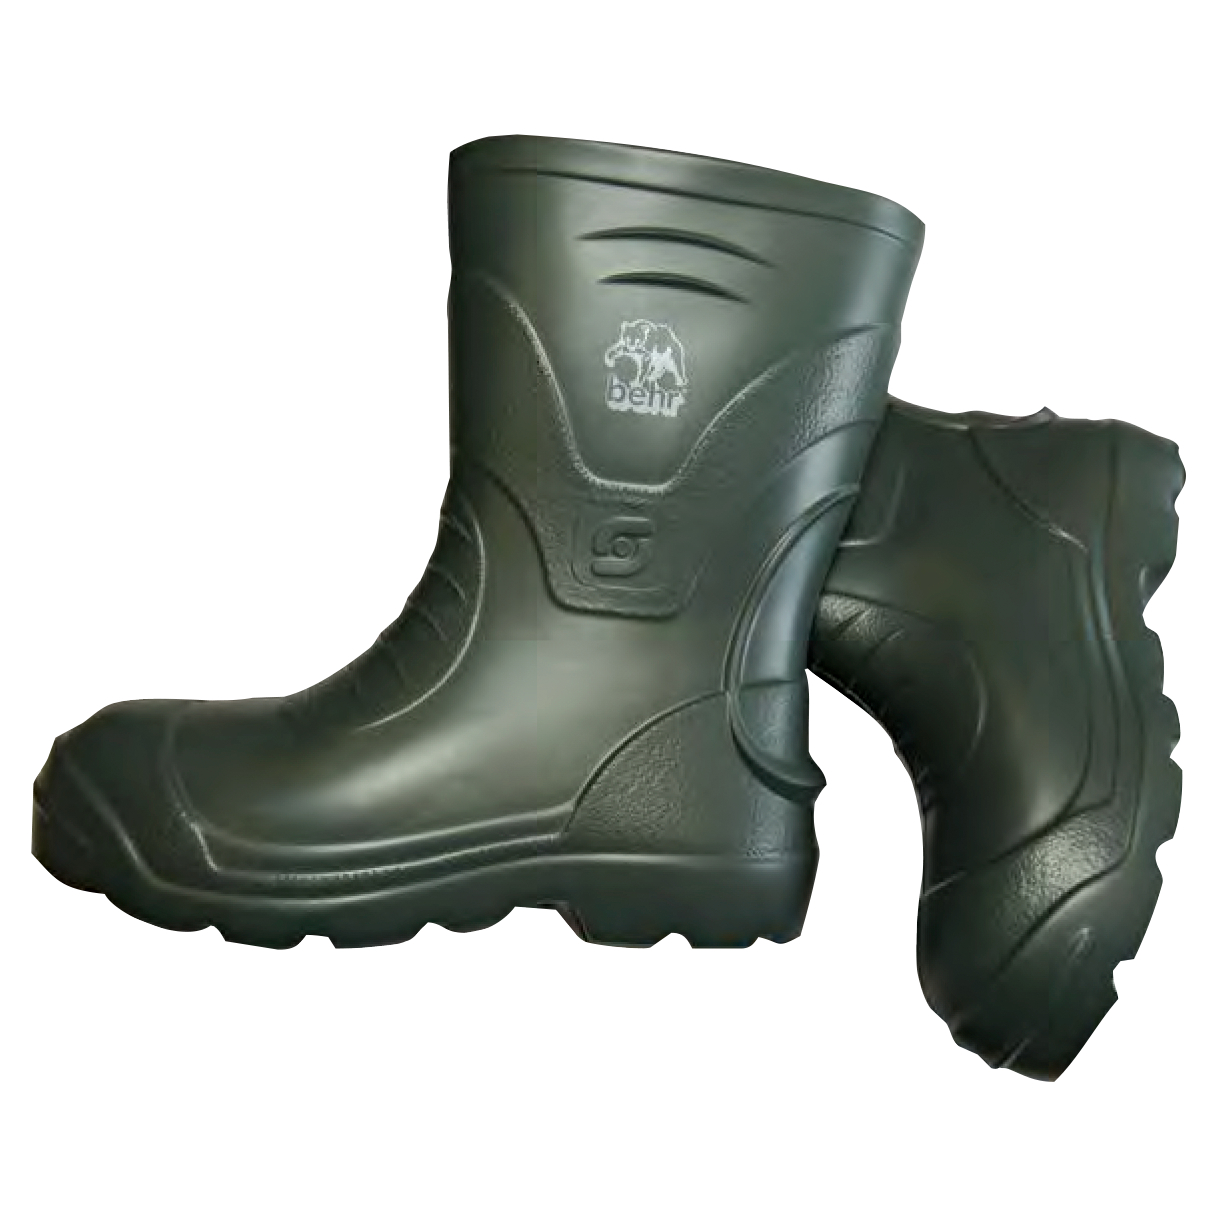 Icebehr Mens Men rubber boots All Season at low prices